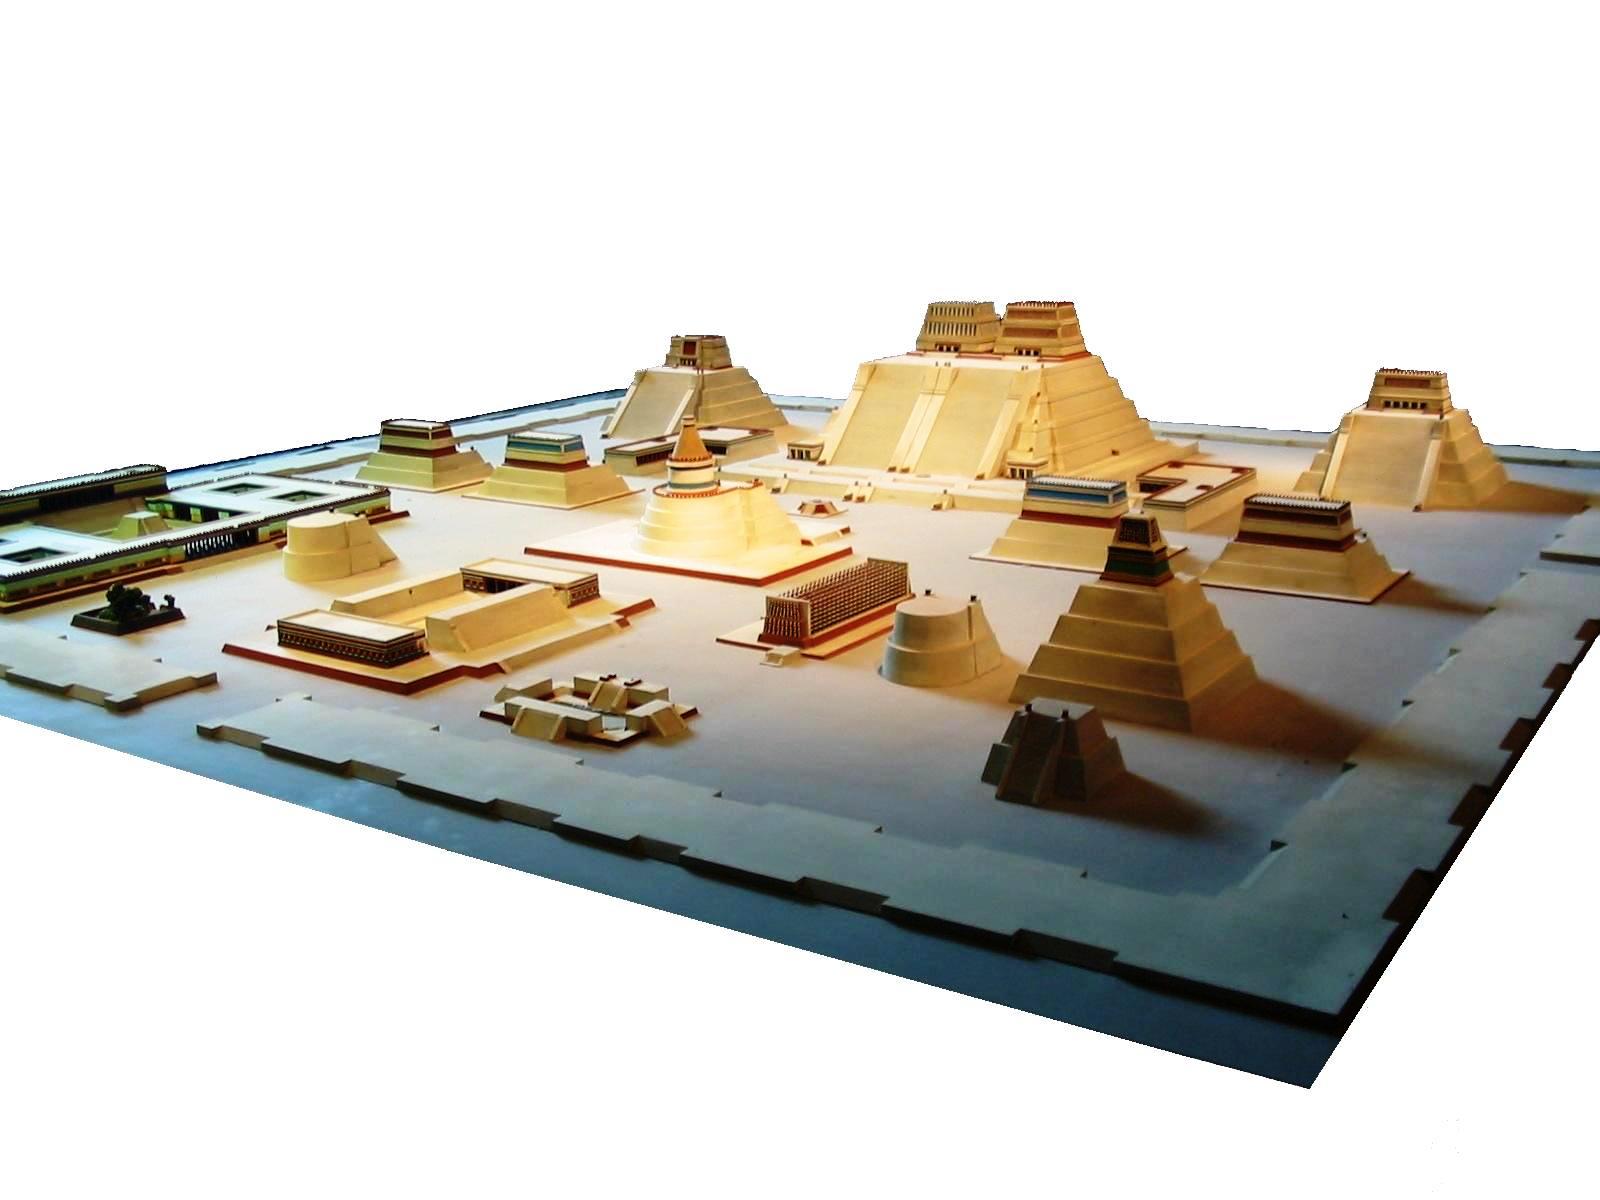 Model of the temple district of Tenochtitlan at the National Museum of AnthropologyBy Thelmadatter - Own work, Public Domain, https://commons.wikimedia.org/w/index.php?curid=3744781